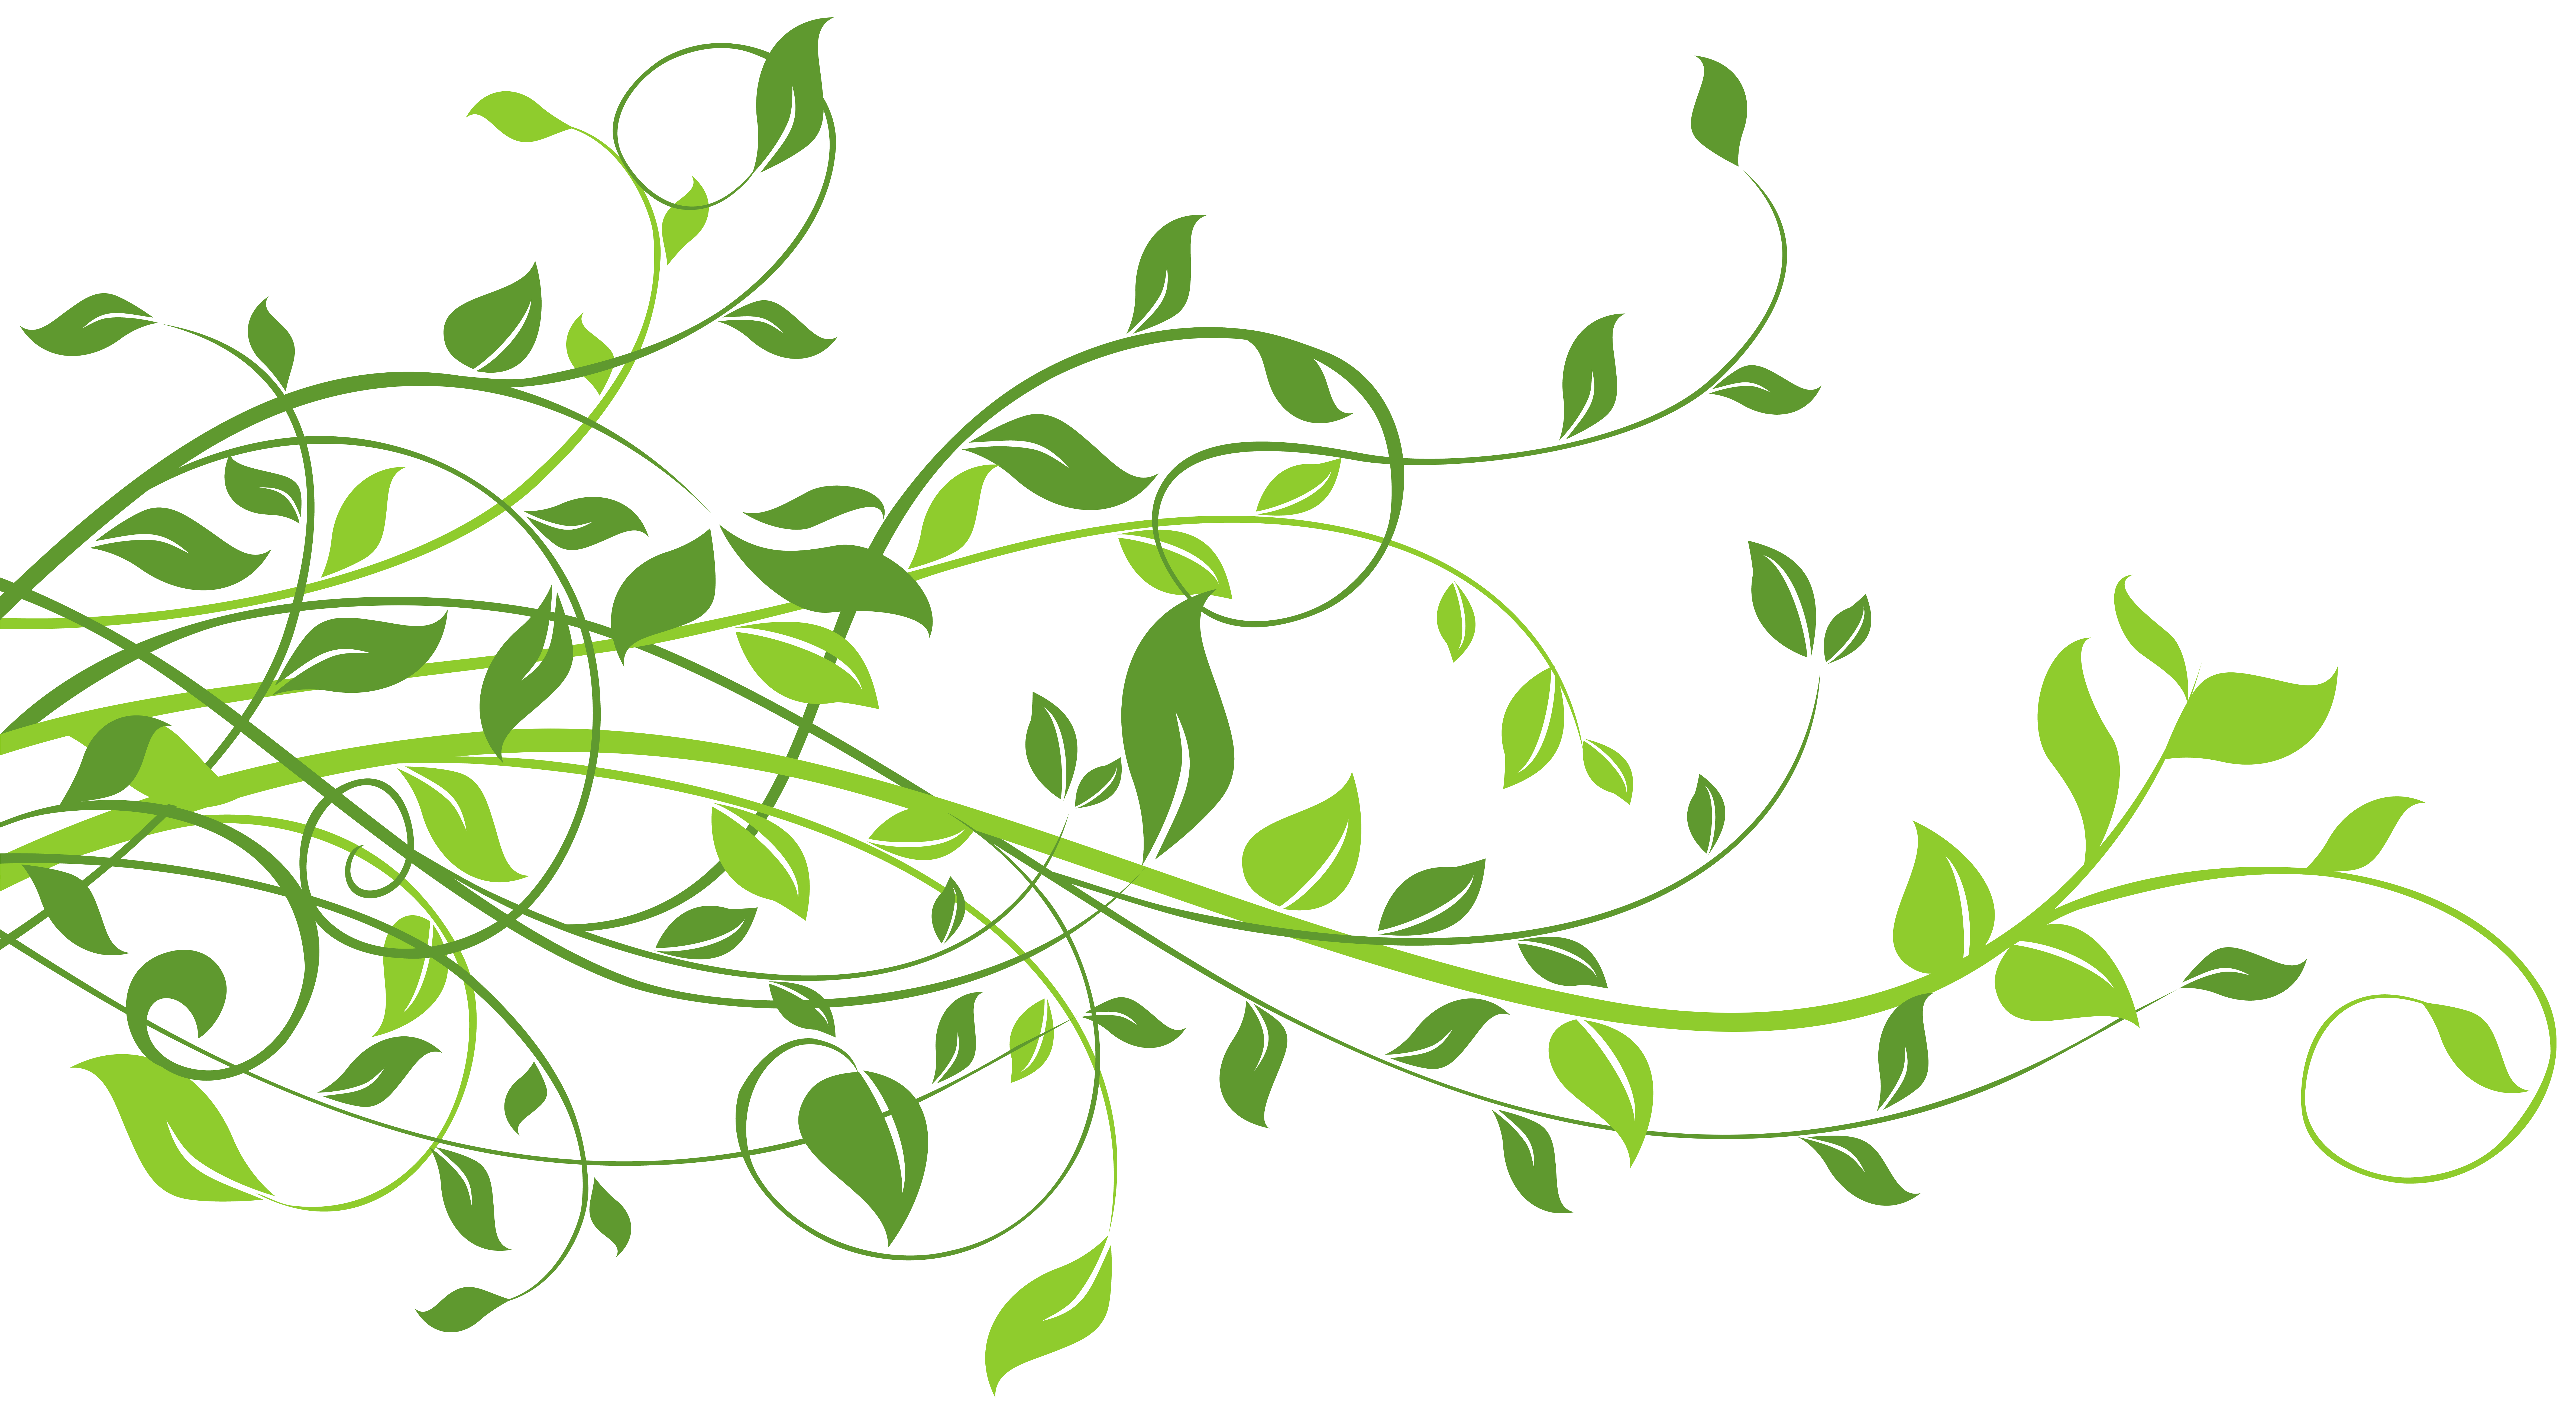 Ivy clipart curved branch. Spring decor with leaves